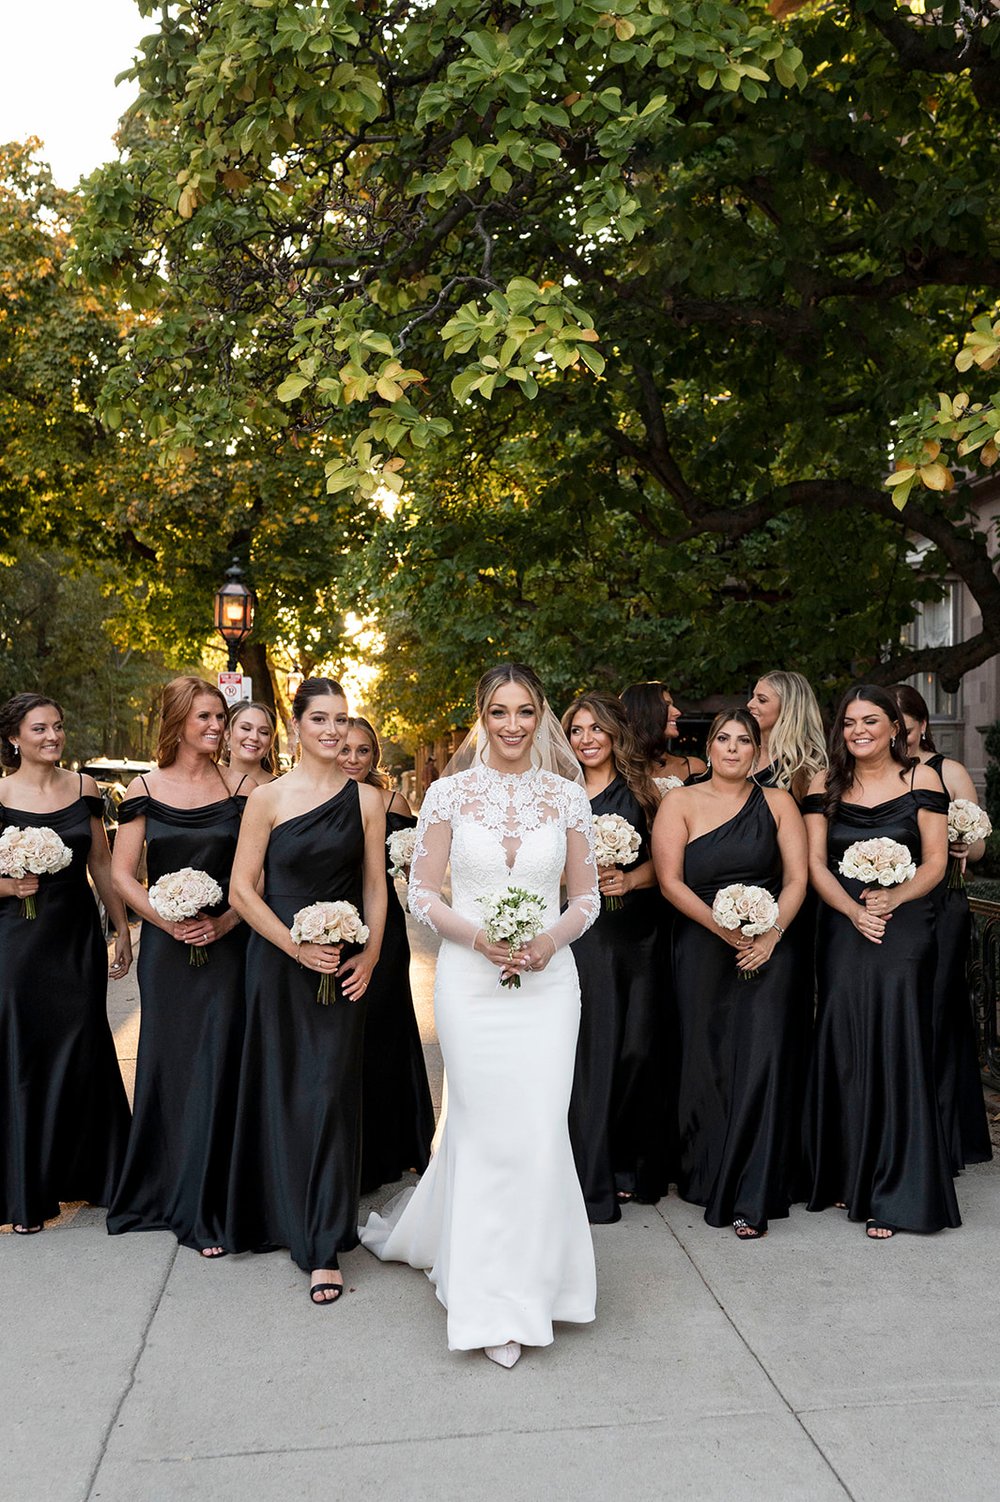 all black bridesmaids dresses during bridal party photos with white floral